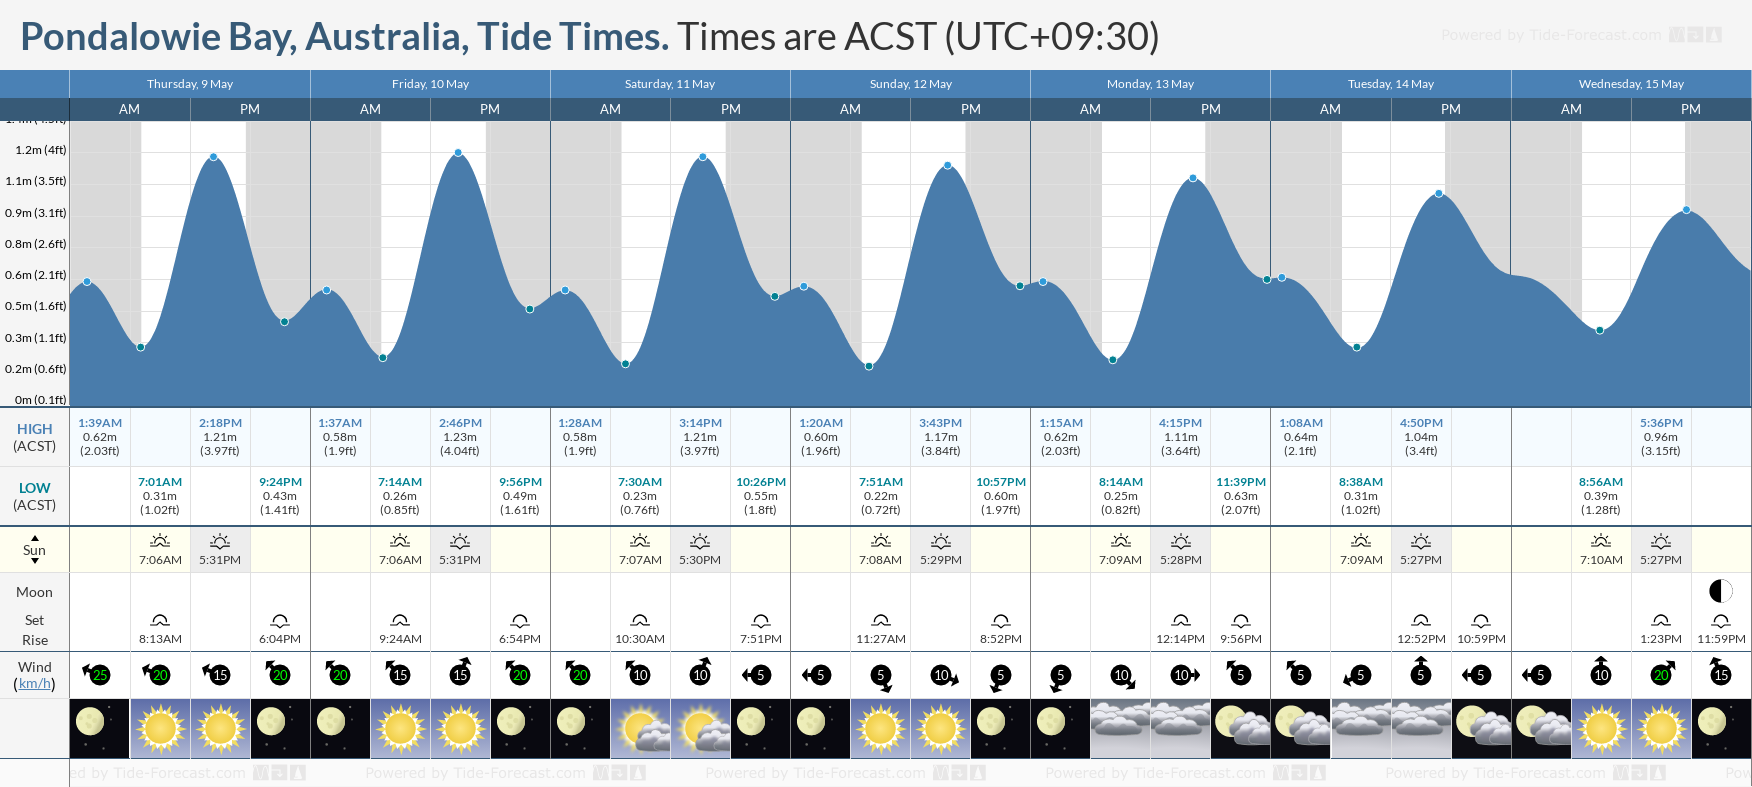 Pondalowie Bay, Australia Tide Chart including high and low tide tide times for the next 7 days